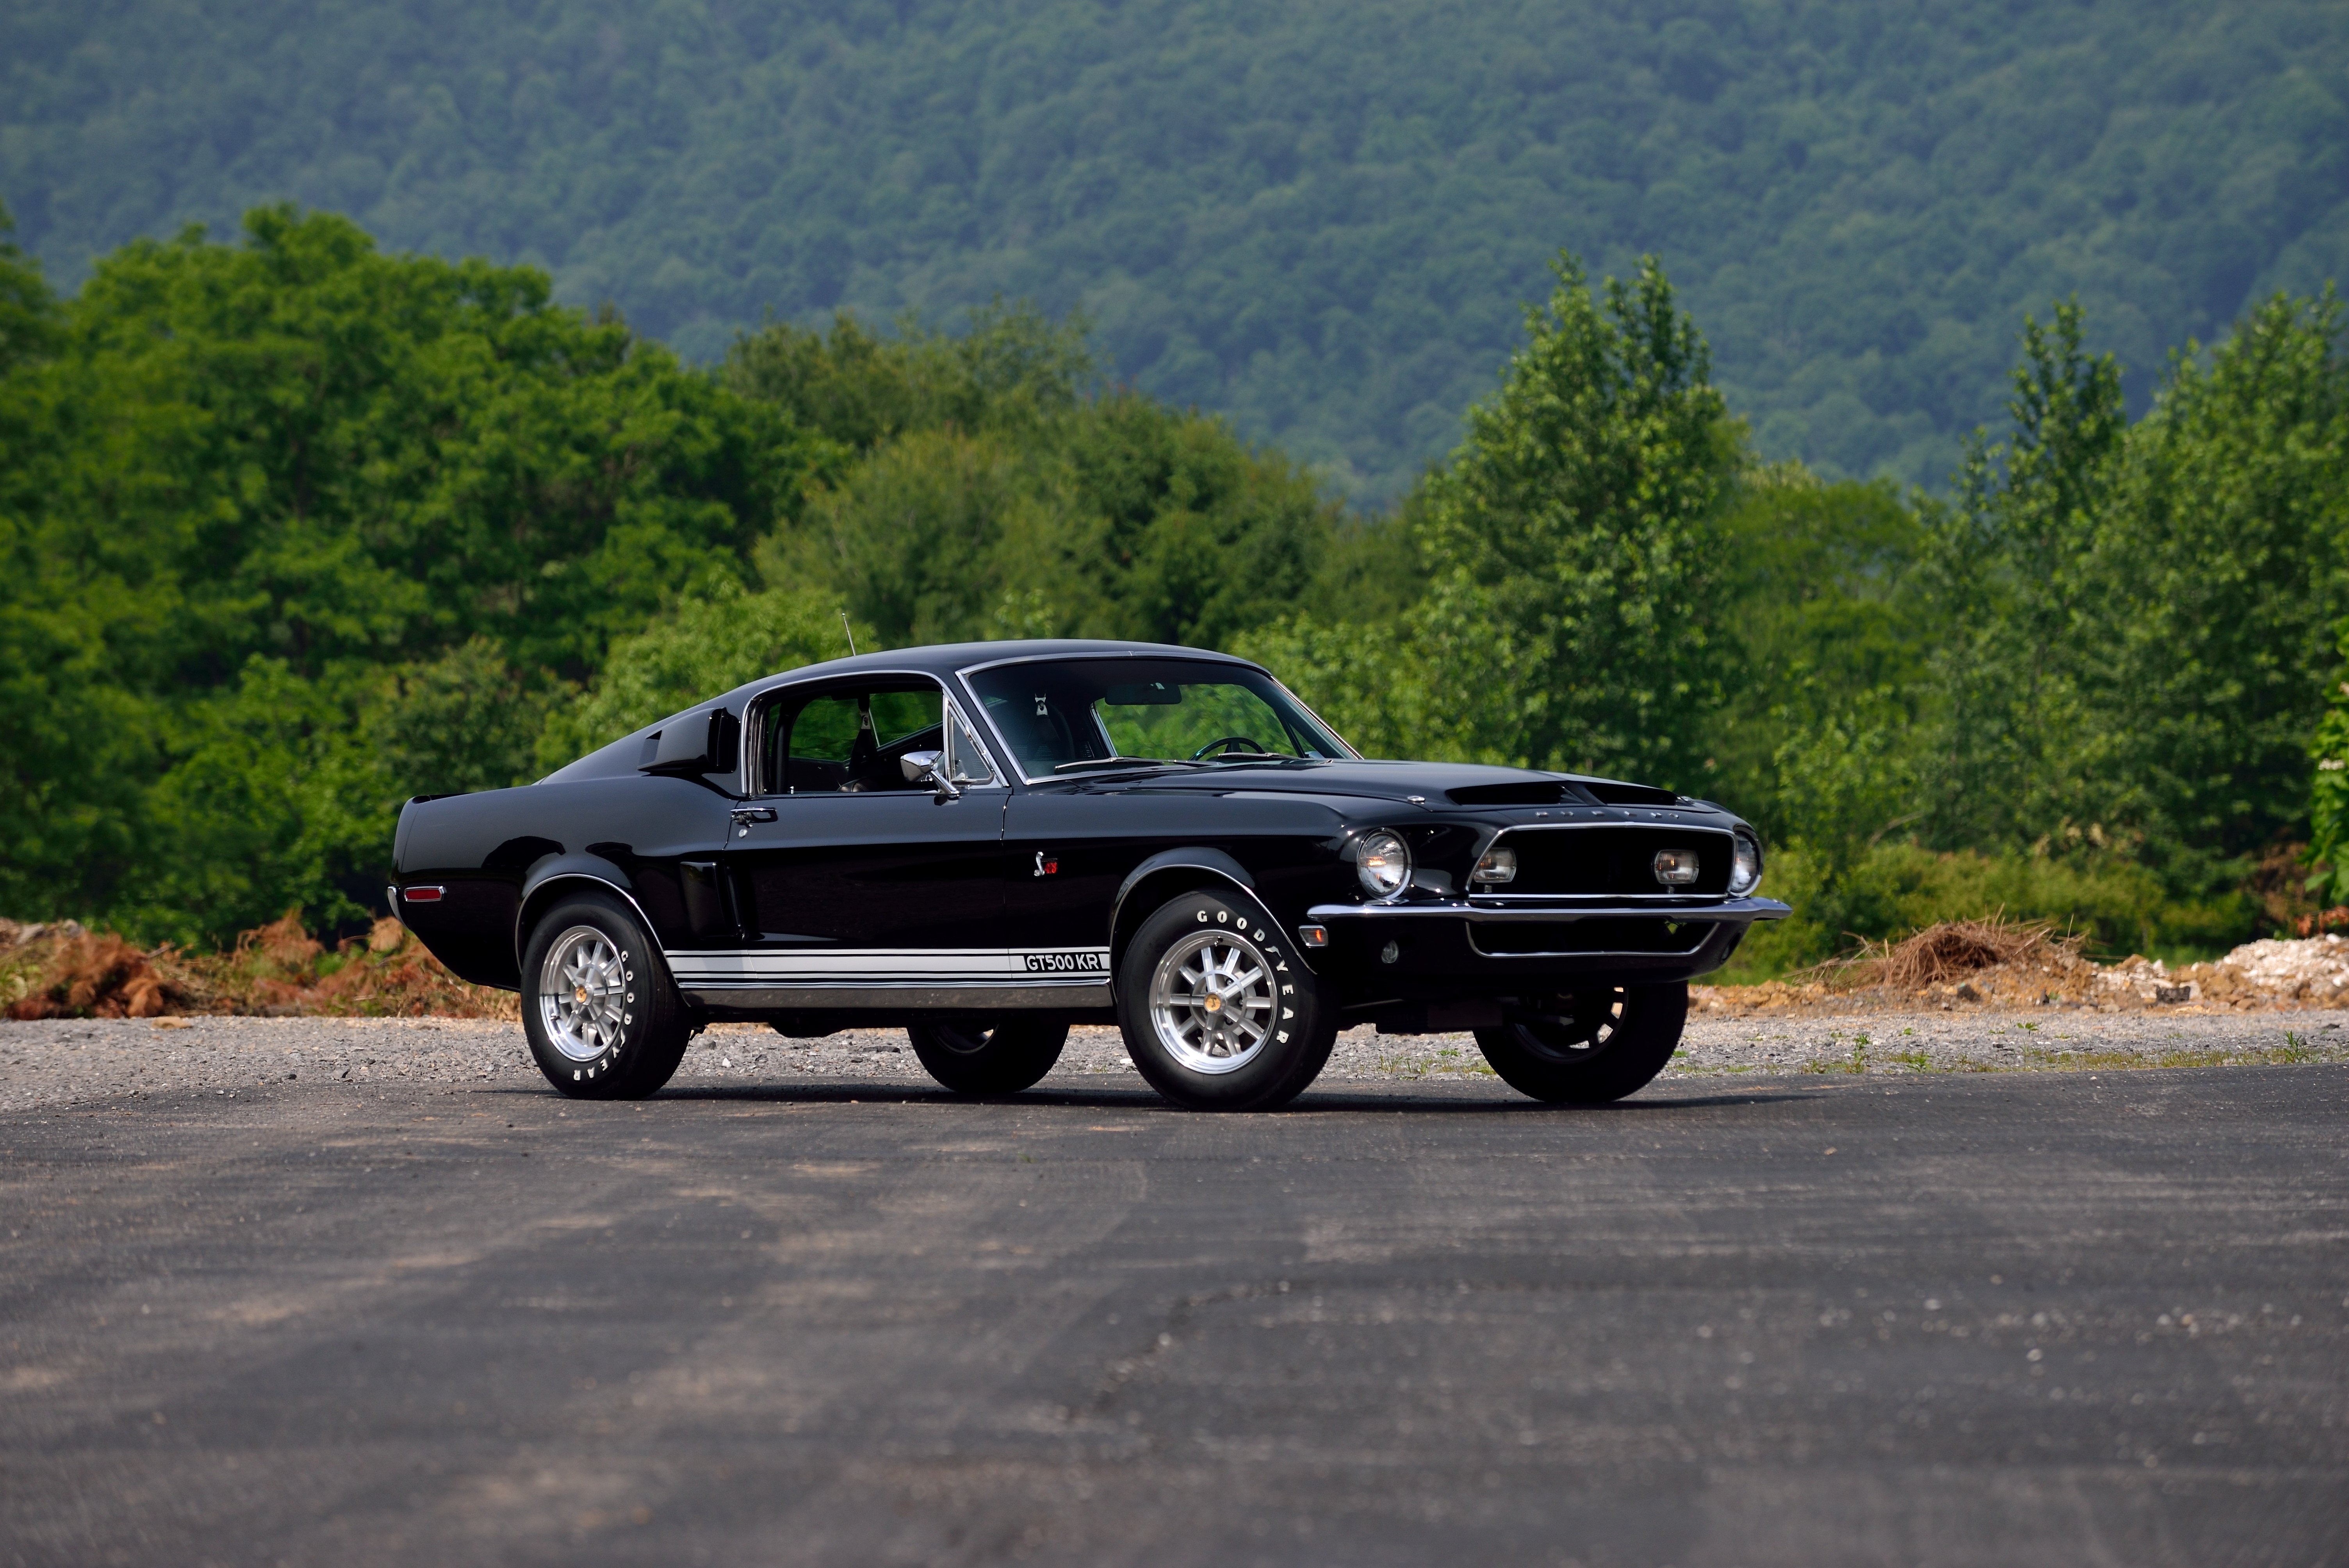 Ford Mustang Shelby Gt 500 1968